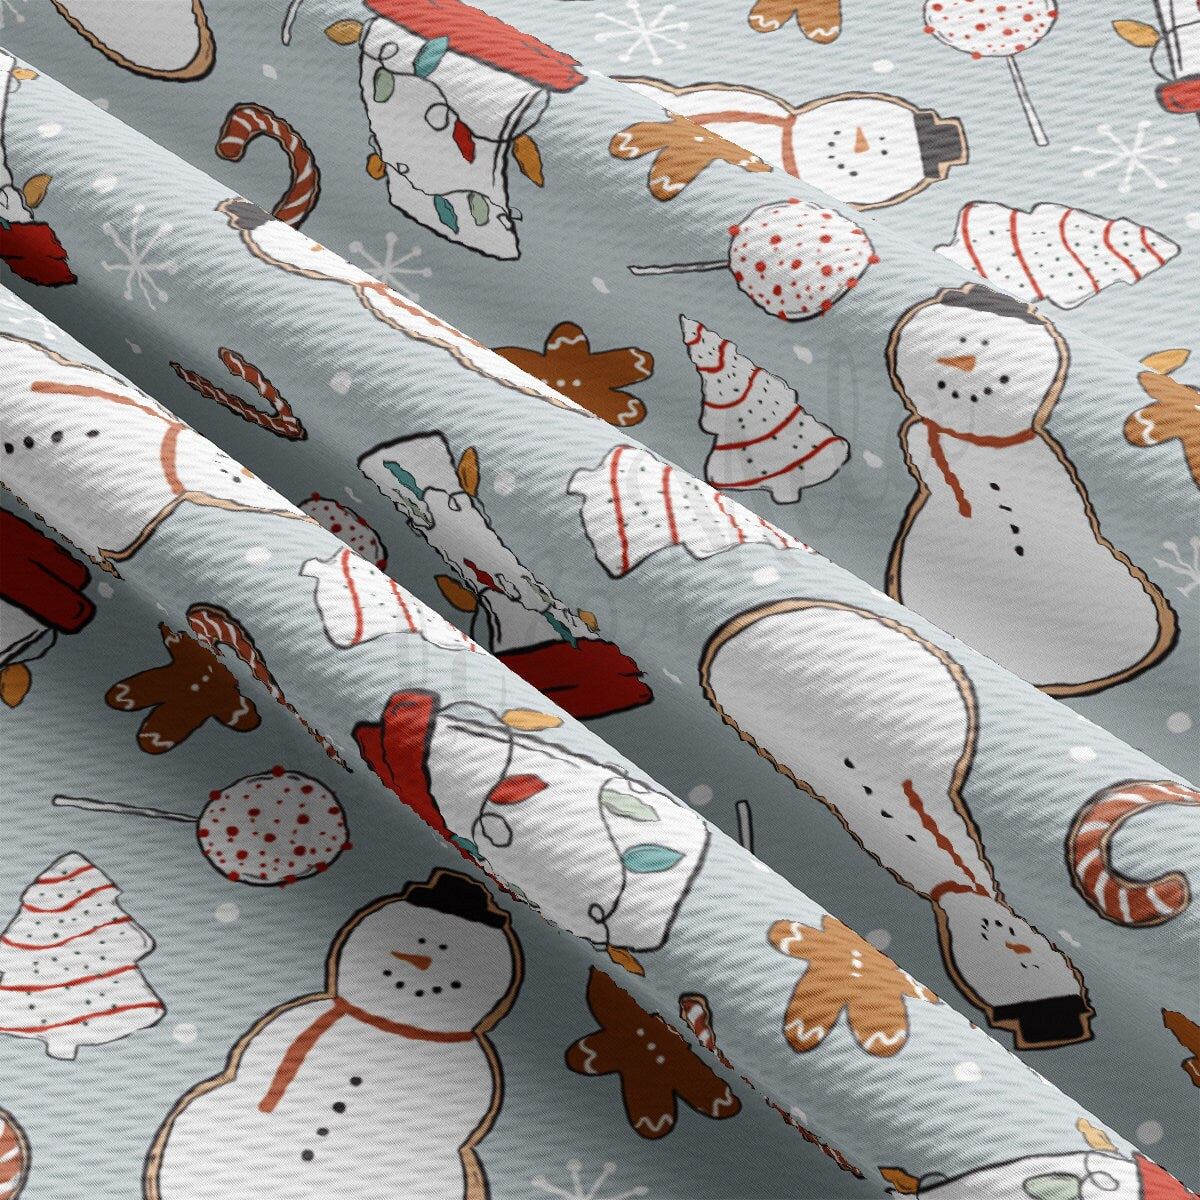 Christmas Printed Liverpool Bullet Textured Fabric by the yard 4Way Stretch Solid Strip Thick Knit Liverpool Fabric AA2090